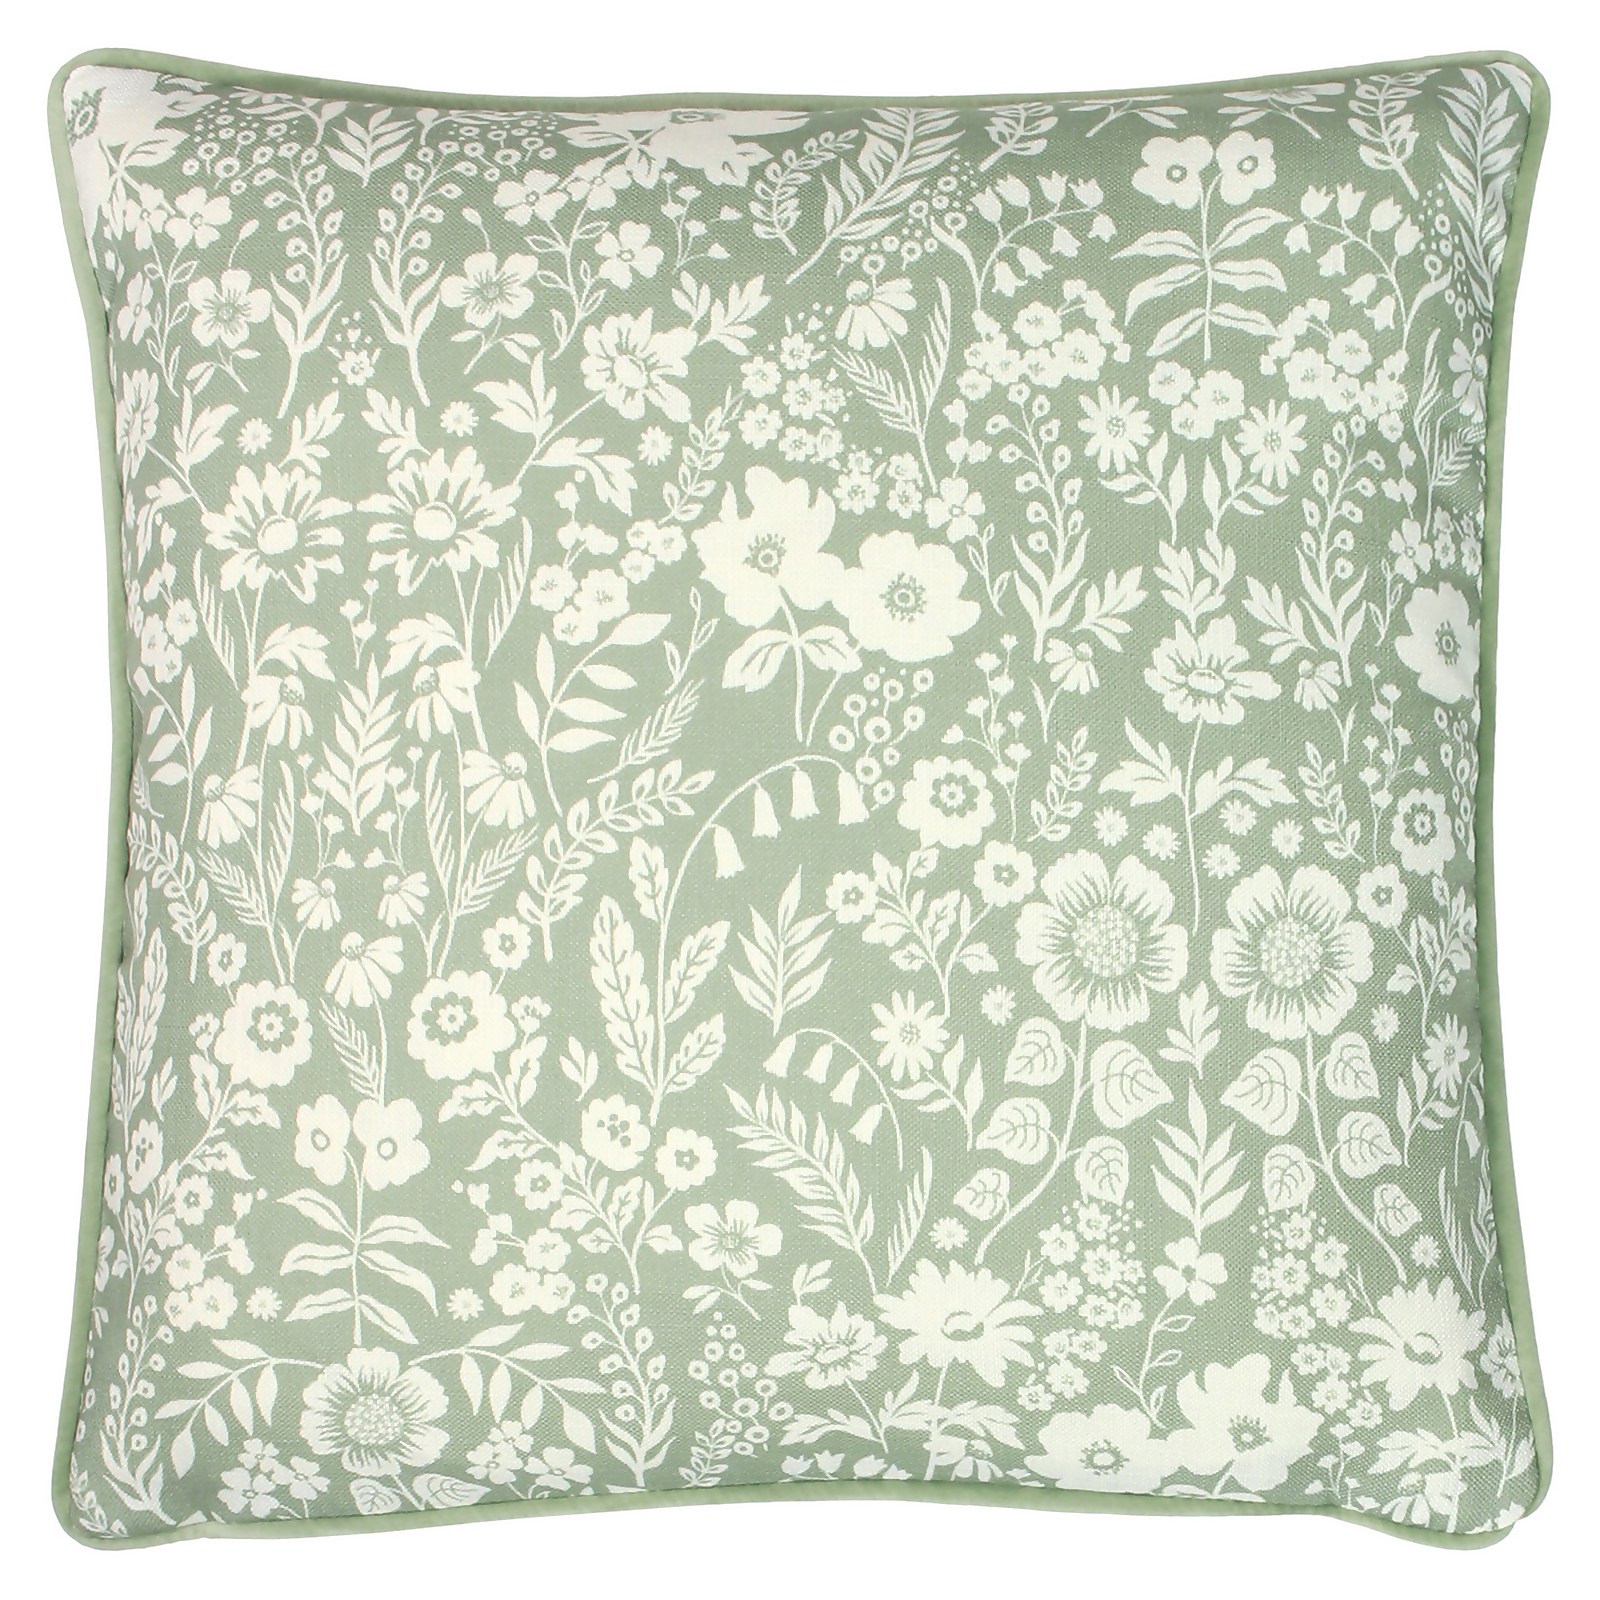 Photo of Floral Meadow Cushion - 43x43cm - Sage